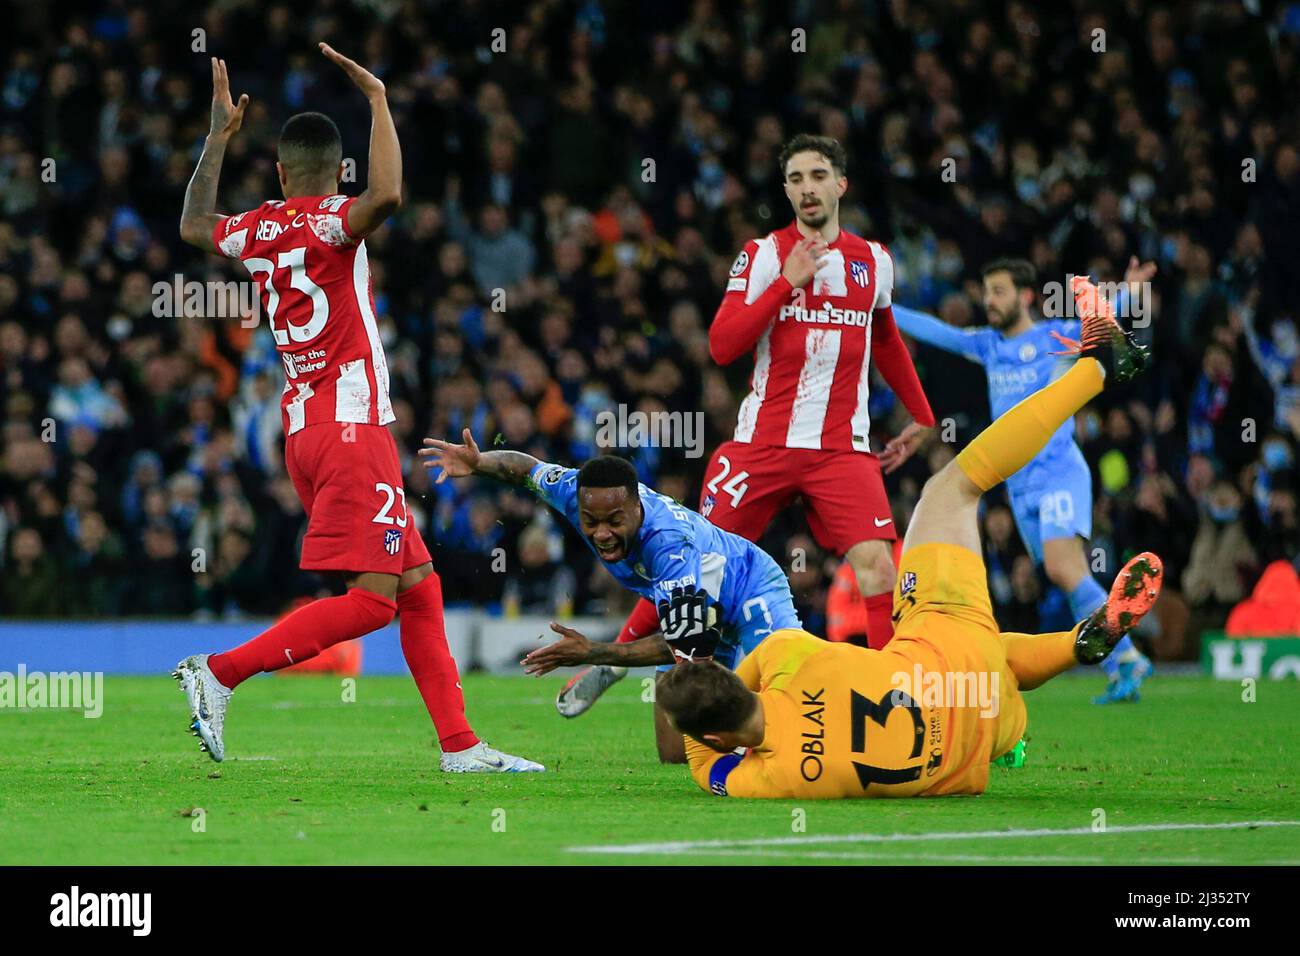 Raheem Sterling #7 of Manchester City  falls in the penalty area after a challenge by Reinildo Mandava #23 of Athletico Madrid but no penalty is given Stock Photo